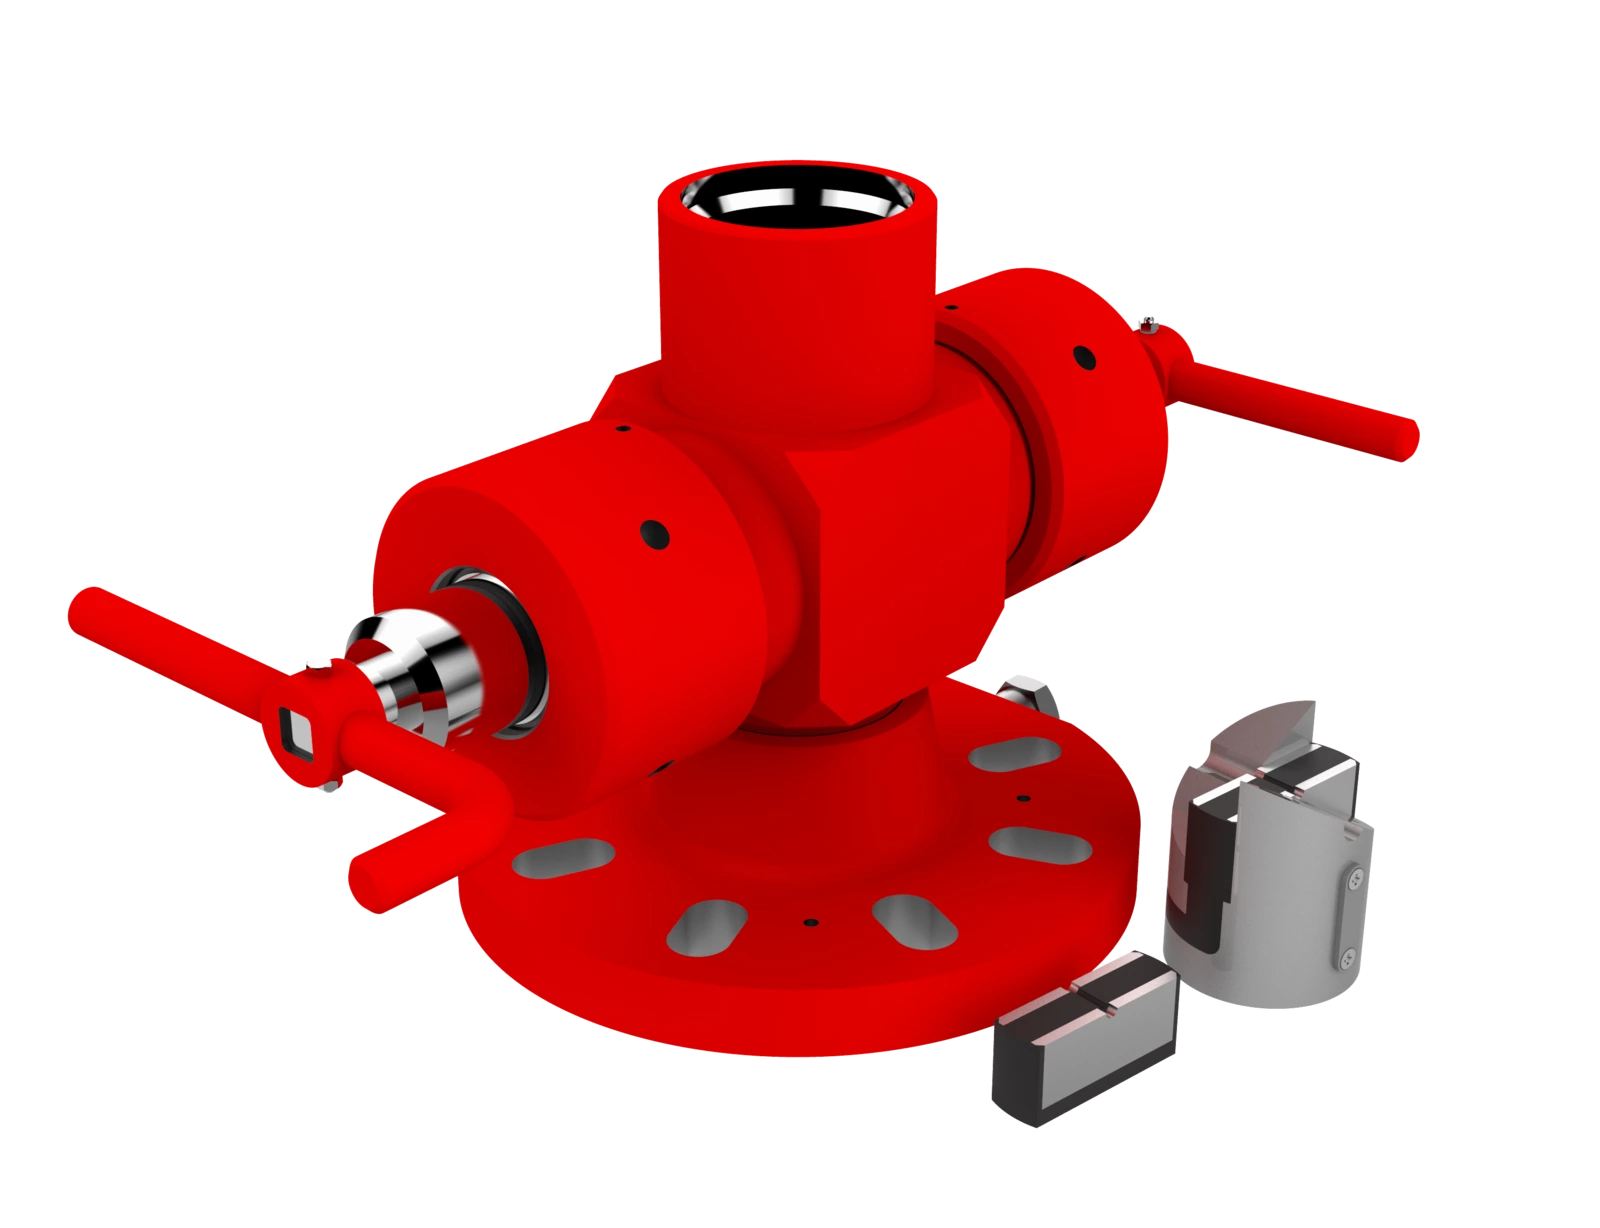 Manual ram blowout preventer “PR-Tekhno” to seal a wellhead, with replaceable rams